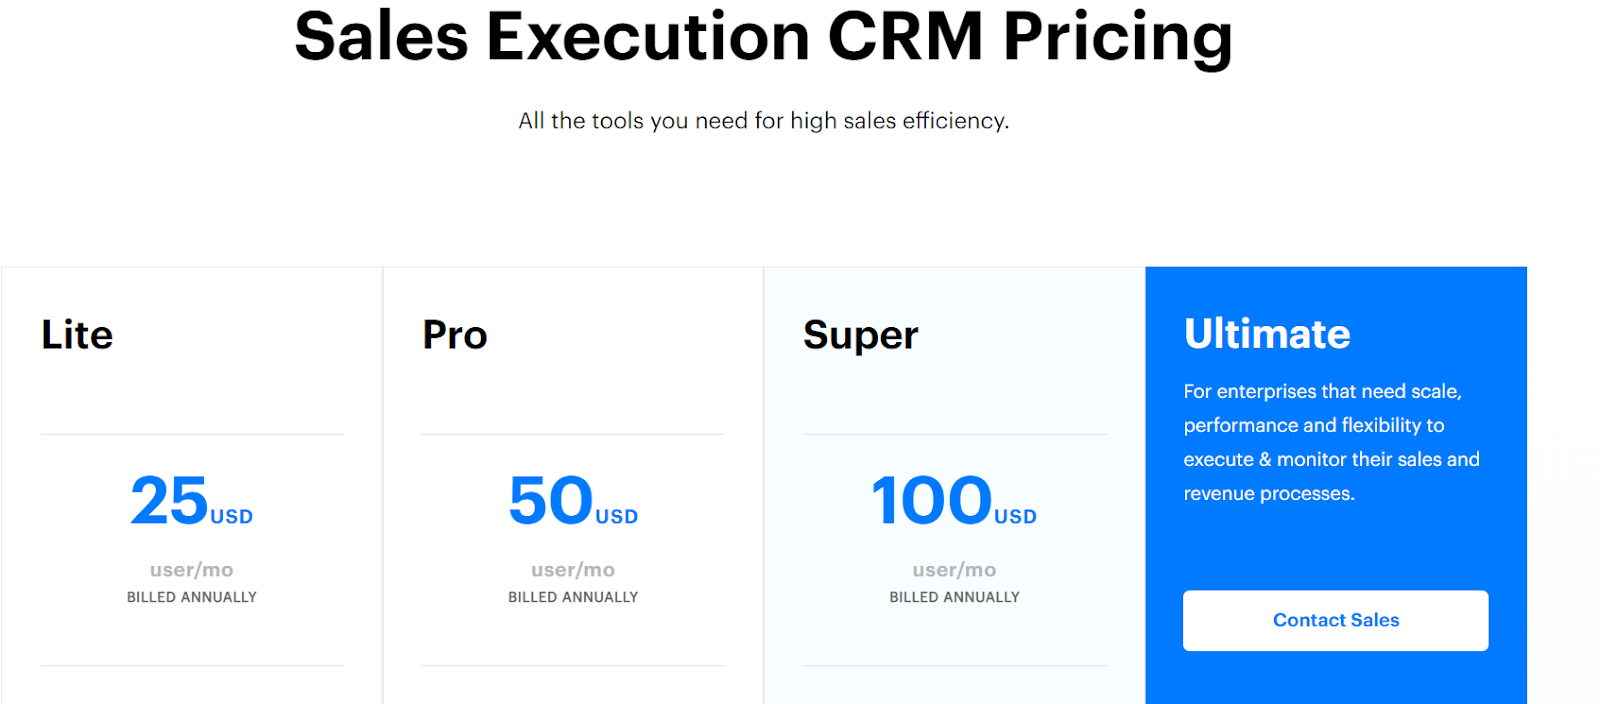 Sales Execution CRM Pricing